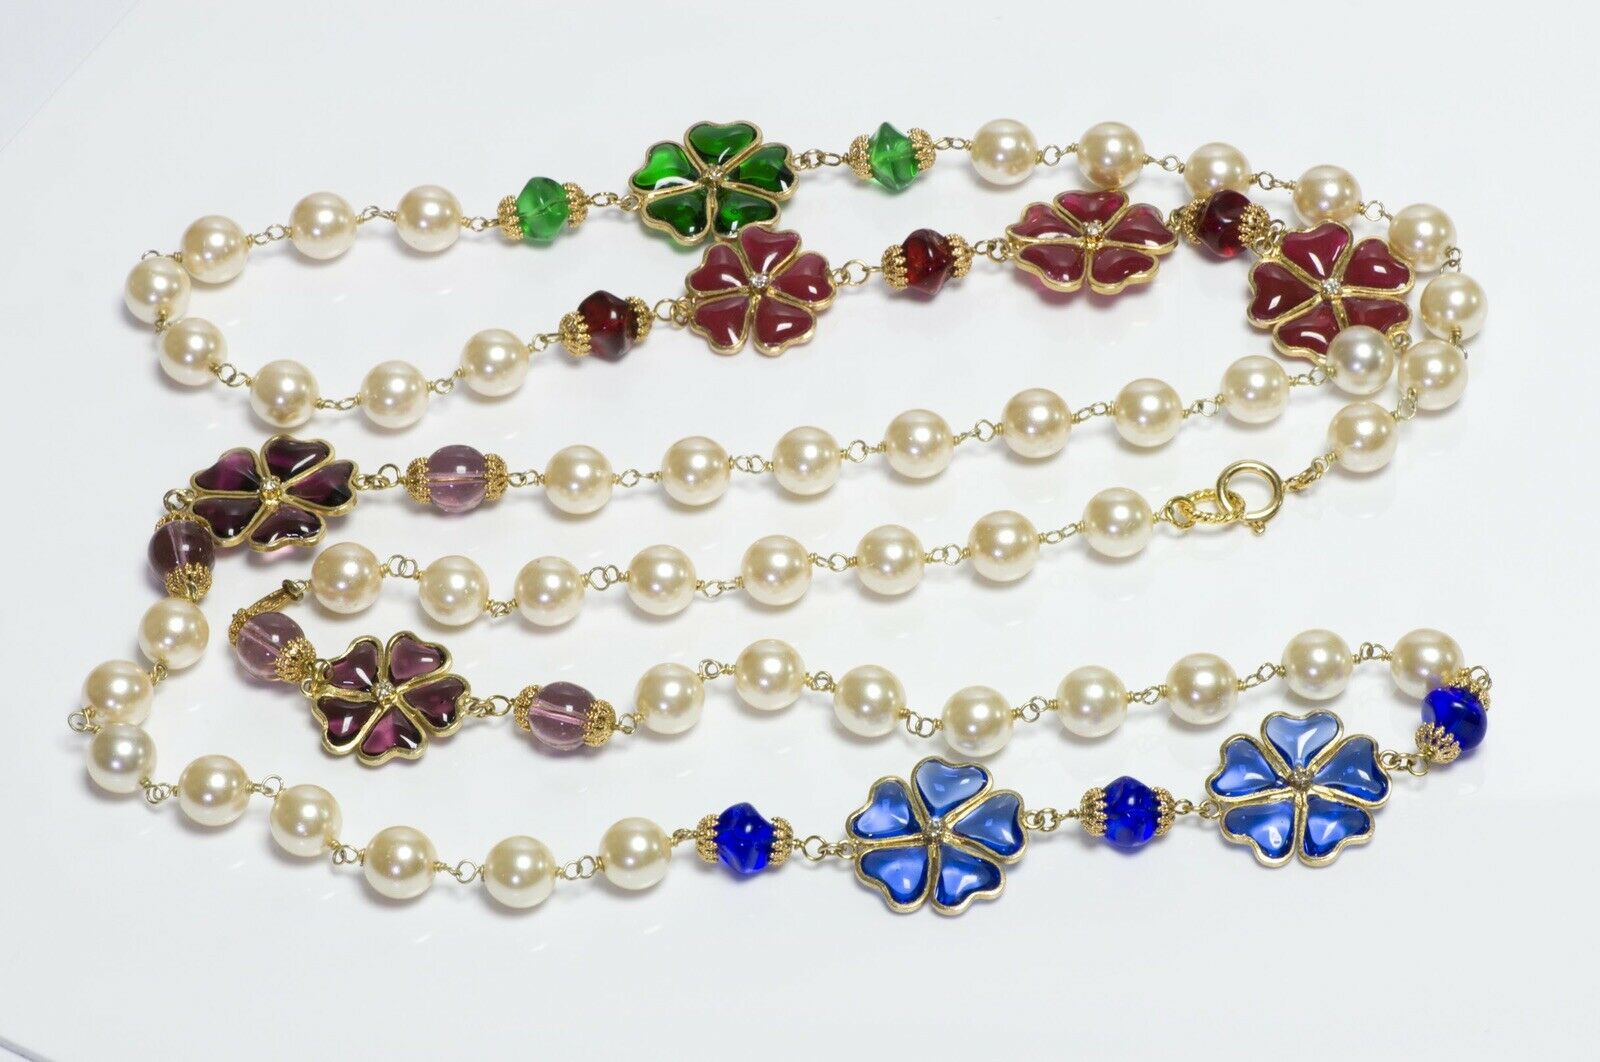 CHANEL Paris 1990’s Gripoix Red Green Blue Camellia Glass Pearl Sautoir Necklace - DSF Antique Jewelry